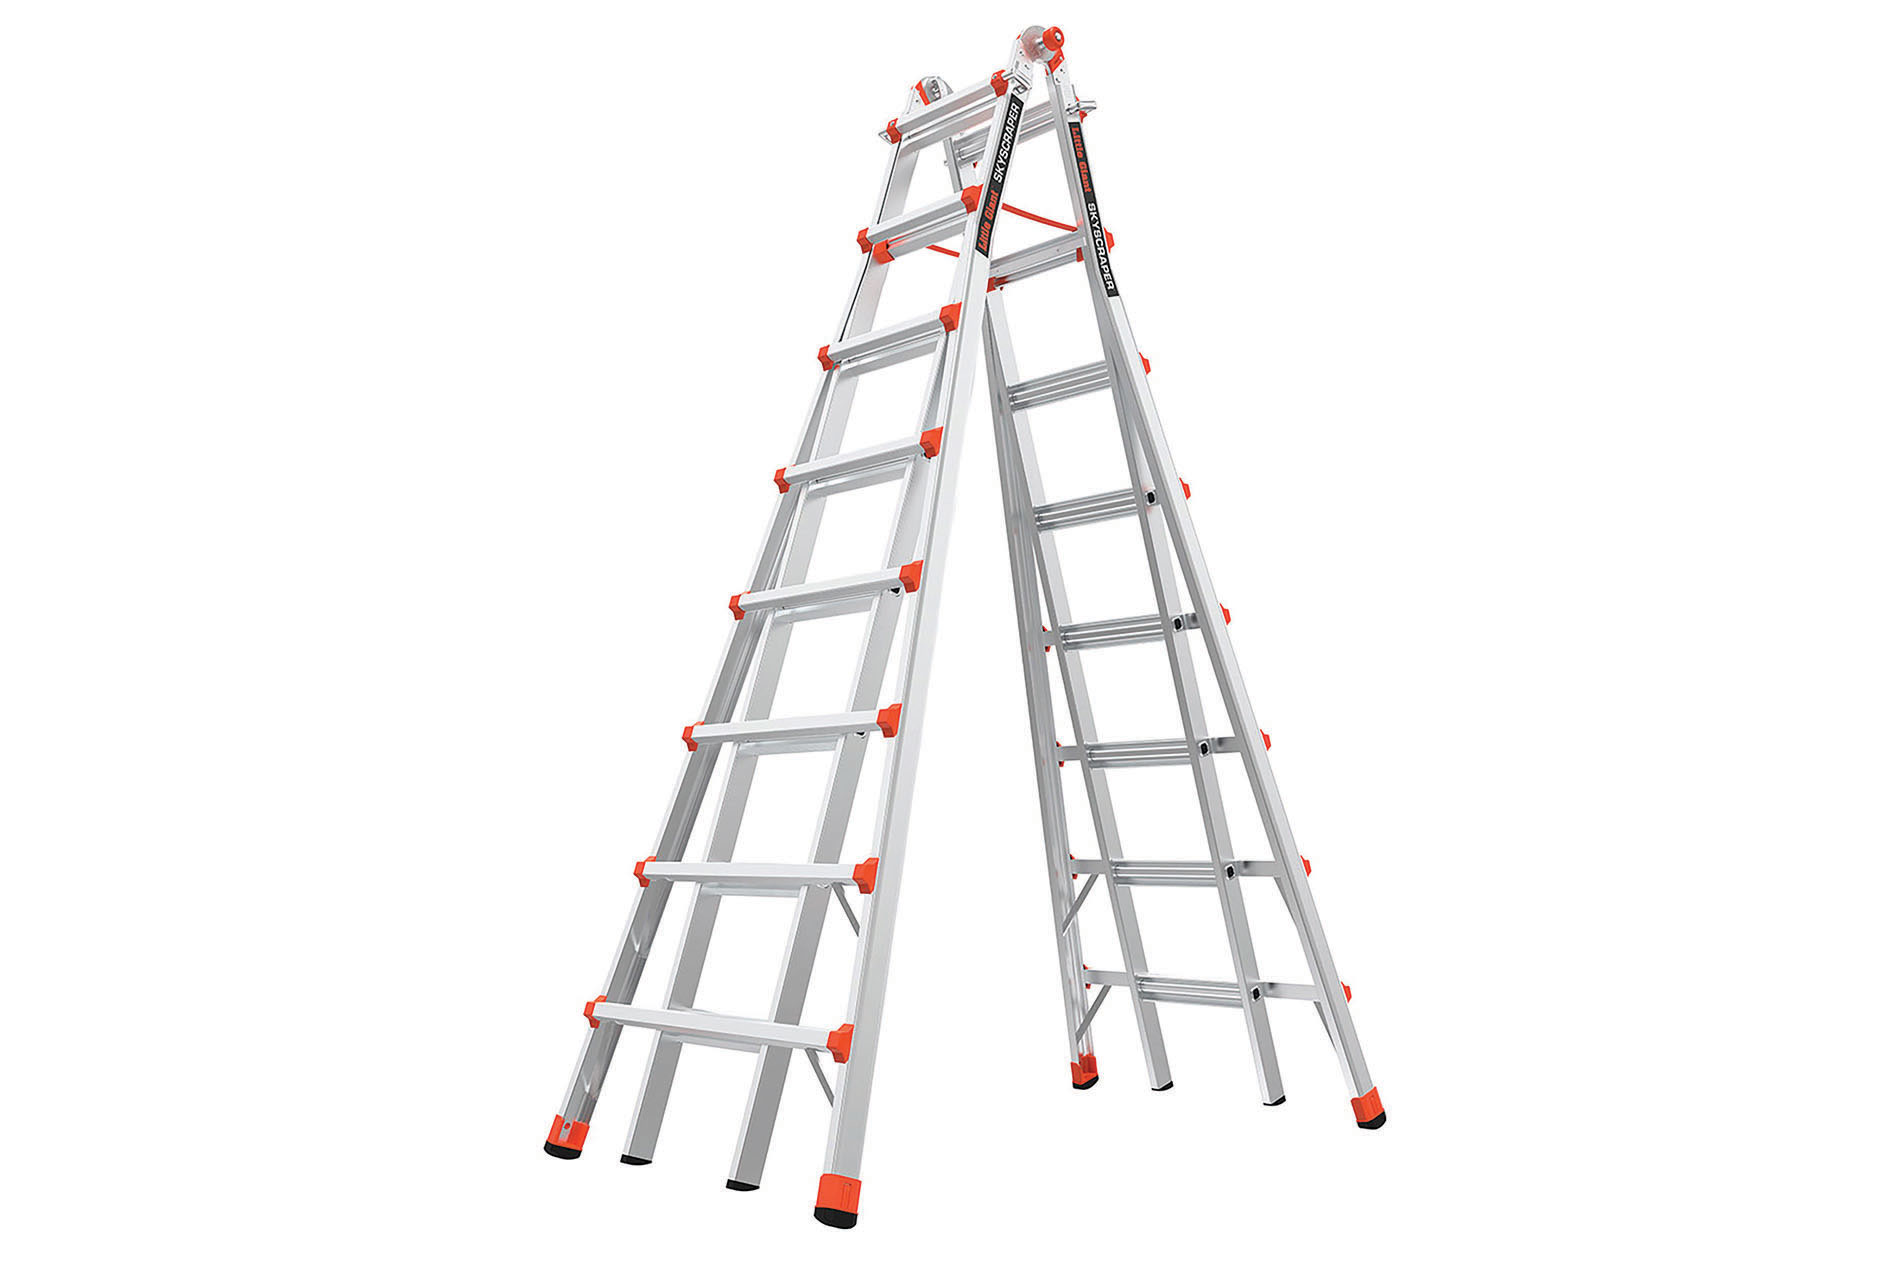 Gray and orange adjustable ladder. Image by Little Giant.